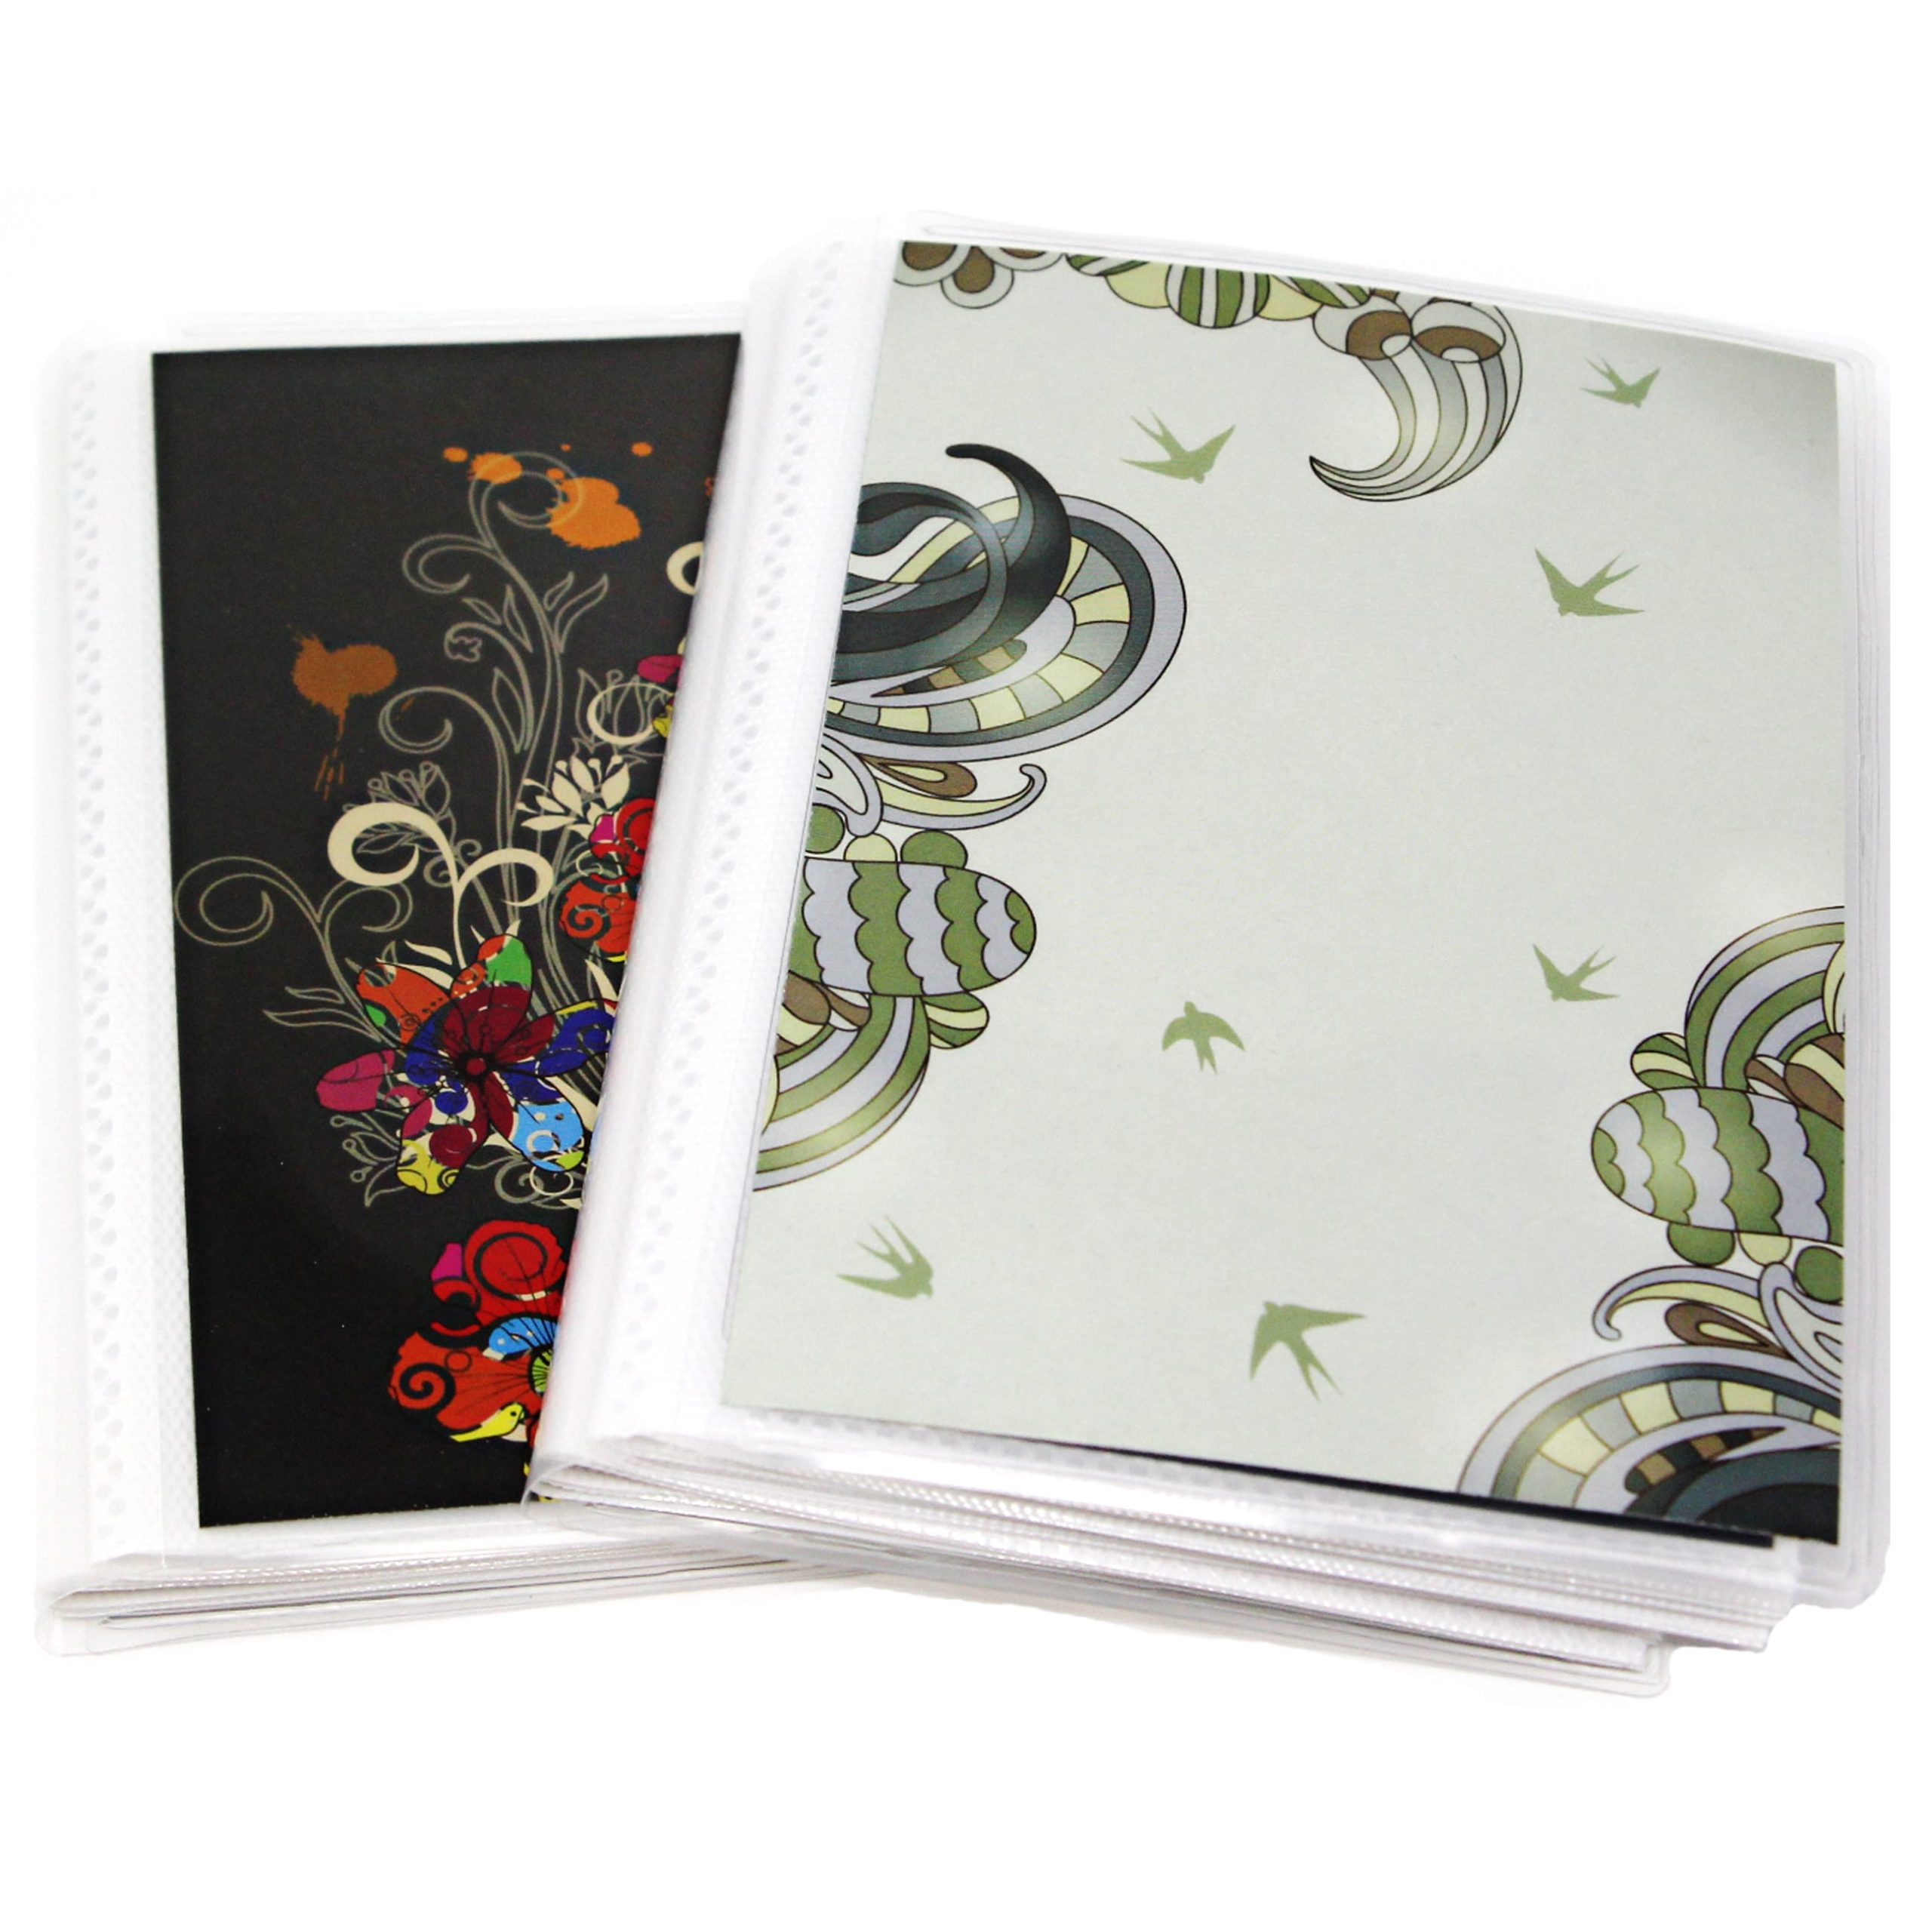 4 x 6 Photo Albums Pack of 6, Each Mini Photo Album Holds Up to 48 4x6  Photos - CocoPolka Company